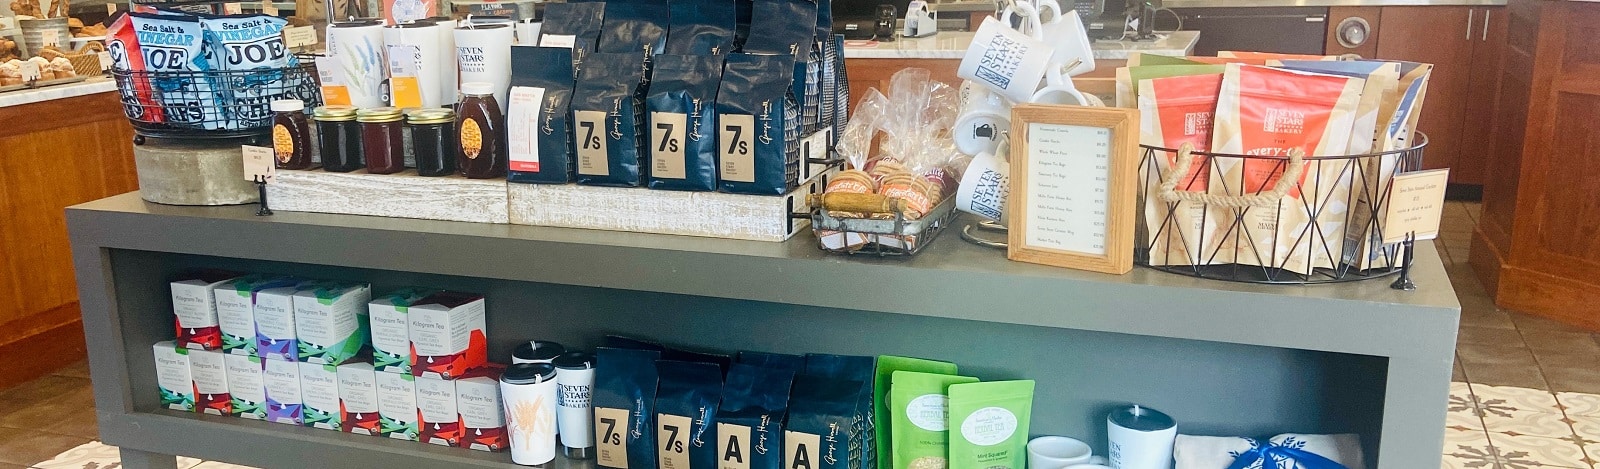 Products displayed on a table in the Seven Stars cafe.